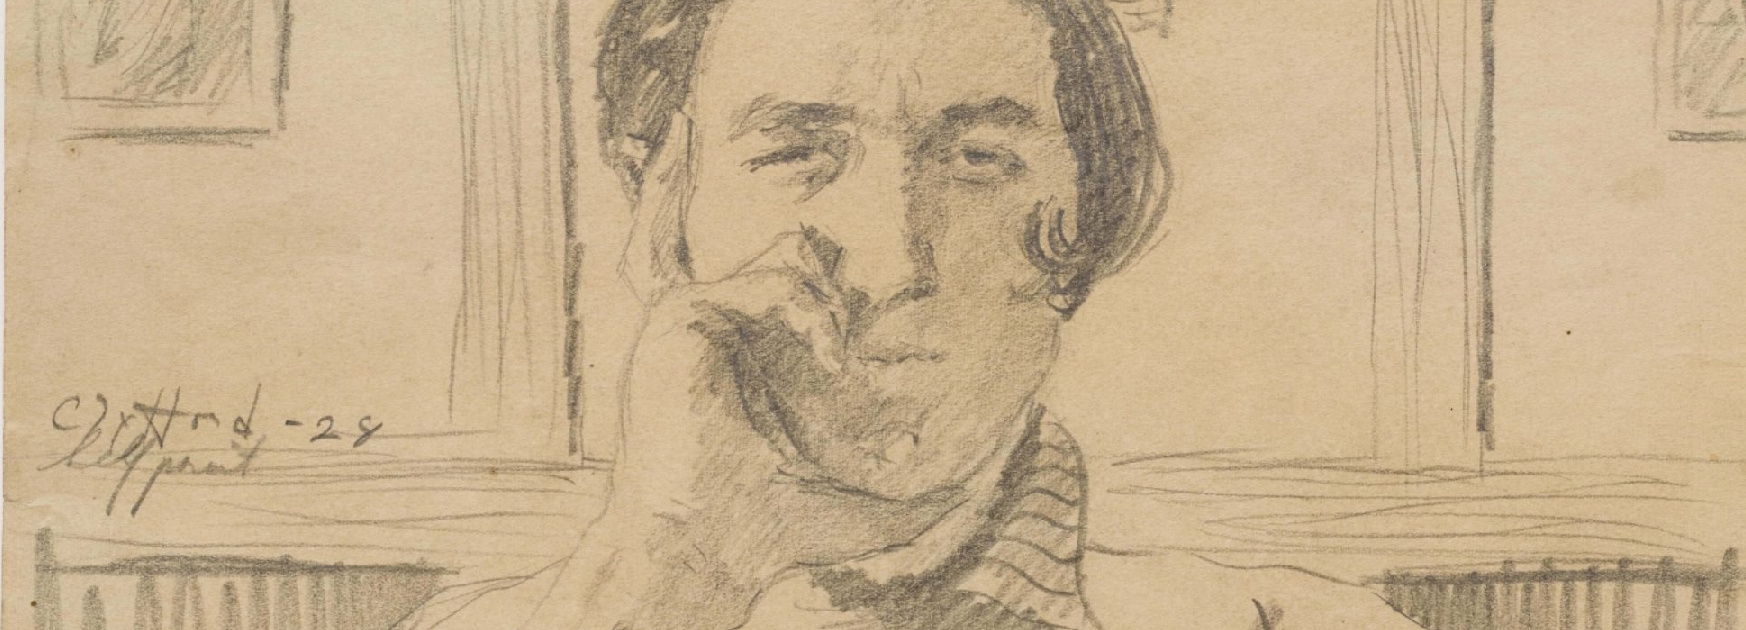 Self-portrait of Clyfford Still at age 23, graphite on paper